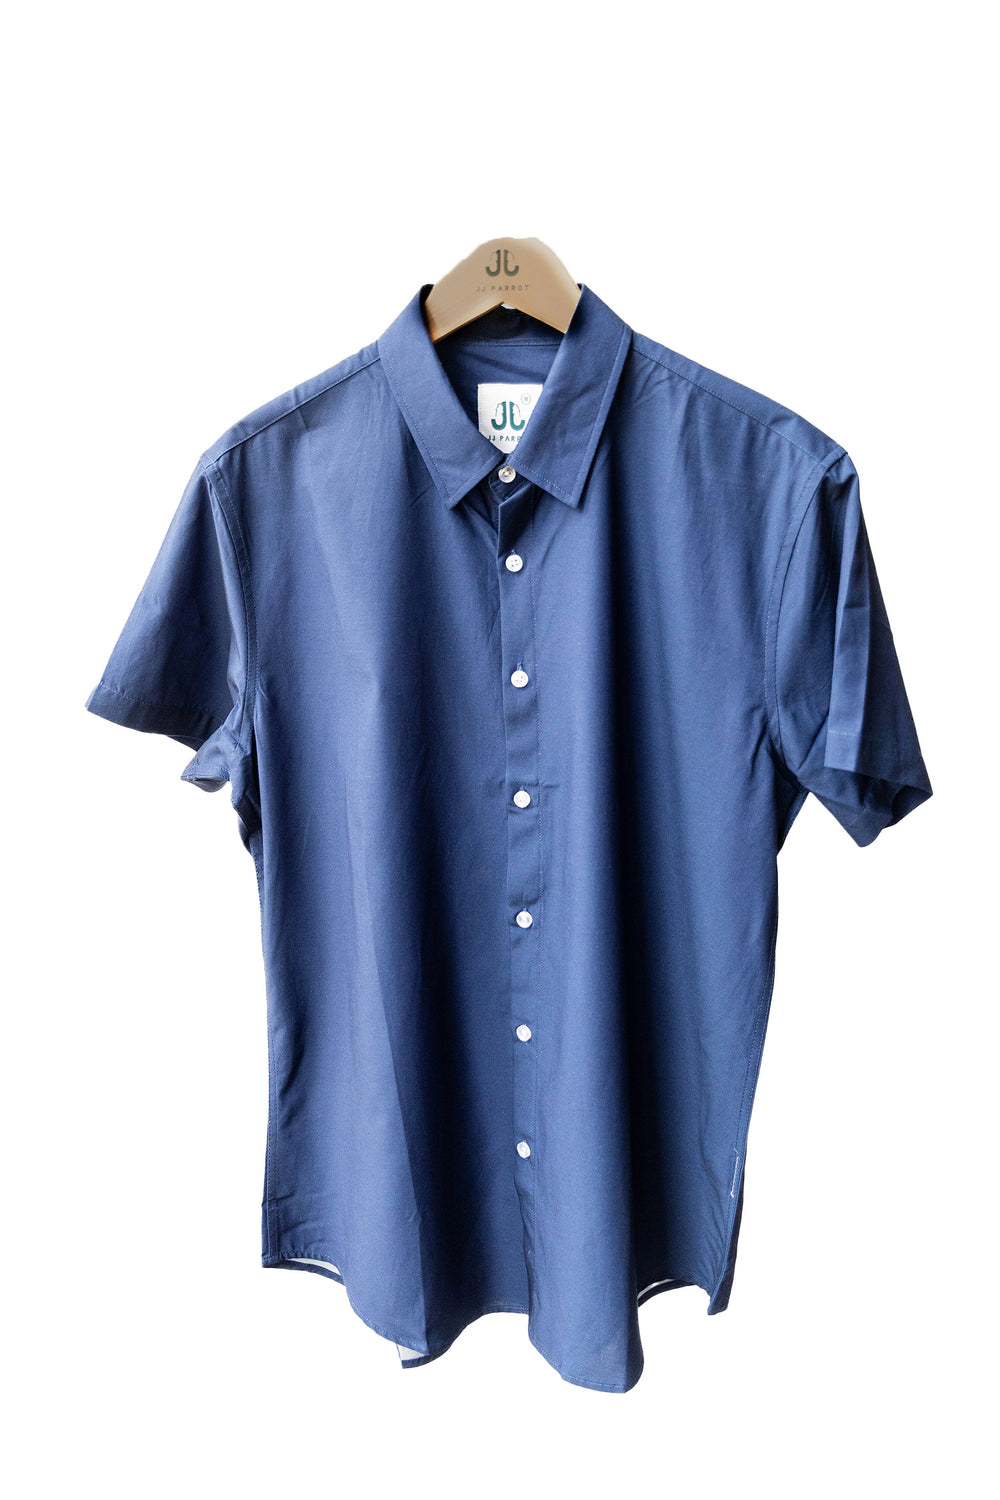 Solid Navy Short Sleeve Button Down